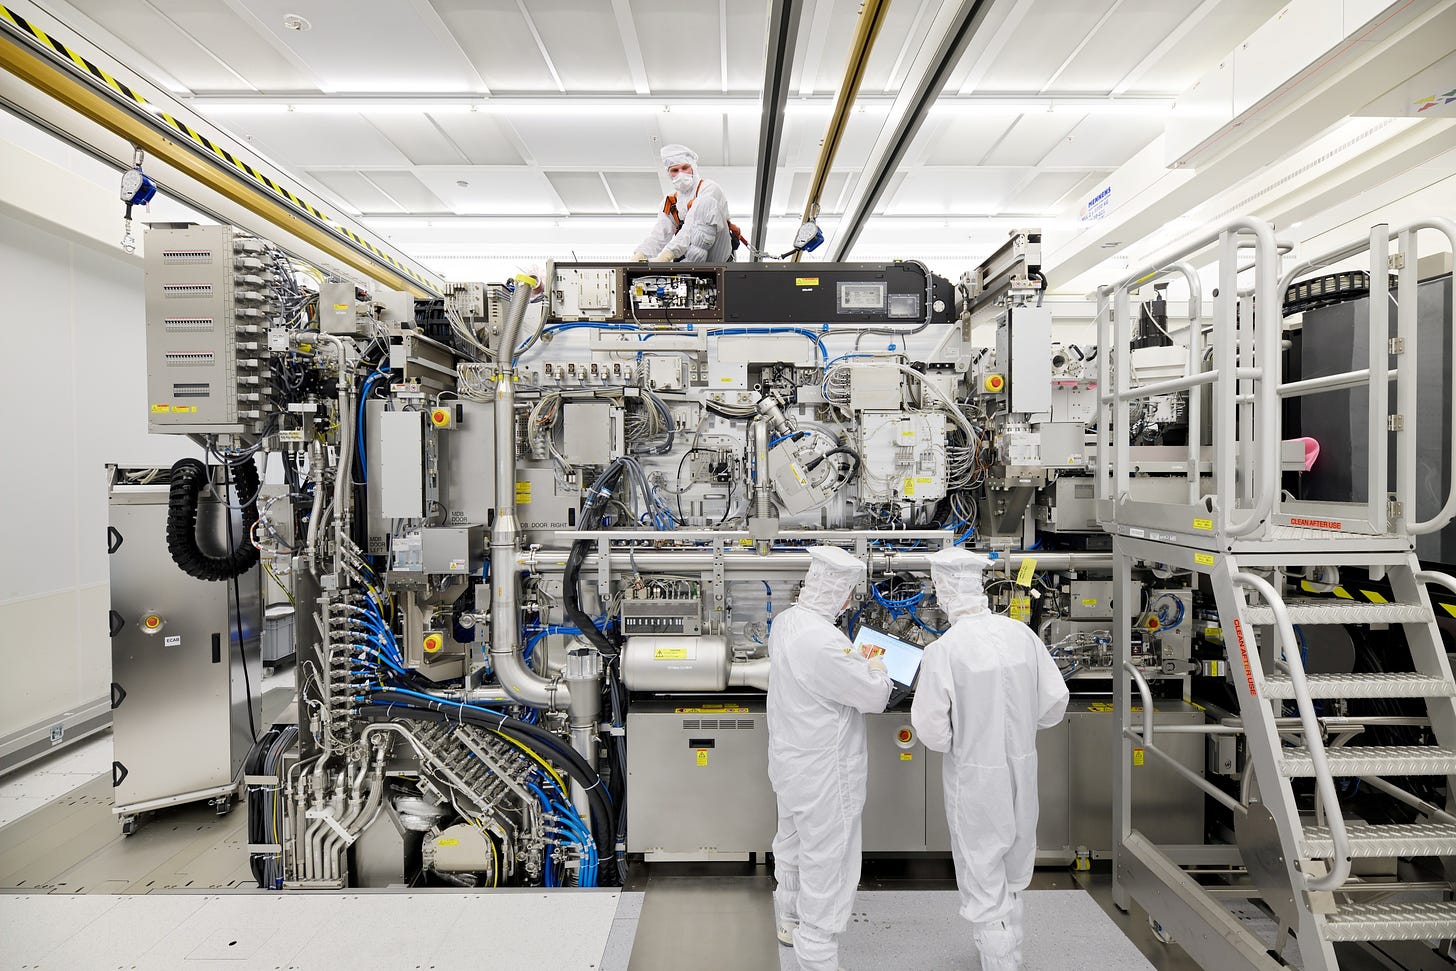 Employees are seen working on the final assembly of ASML's TWINSCAN NXE:3400B semiconductor lithography tool with its panels removed, in Veldhoven, Netherlands, in this picture taken April 4, 2019. Bart van Overbeeke Fotografie/ASML/Handout via REUTERS ATTENTION EDITORS - THIS IMAGE HAS BEEN SUPPLIED BY A THIRD PARTY. MANDATORY CREDIT.